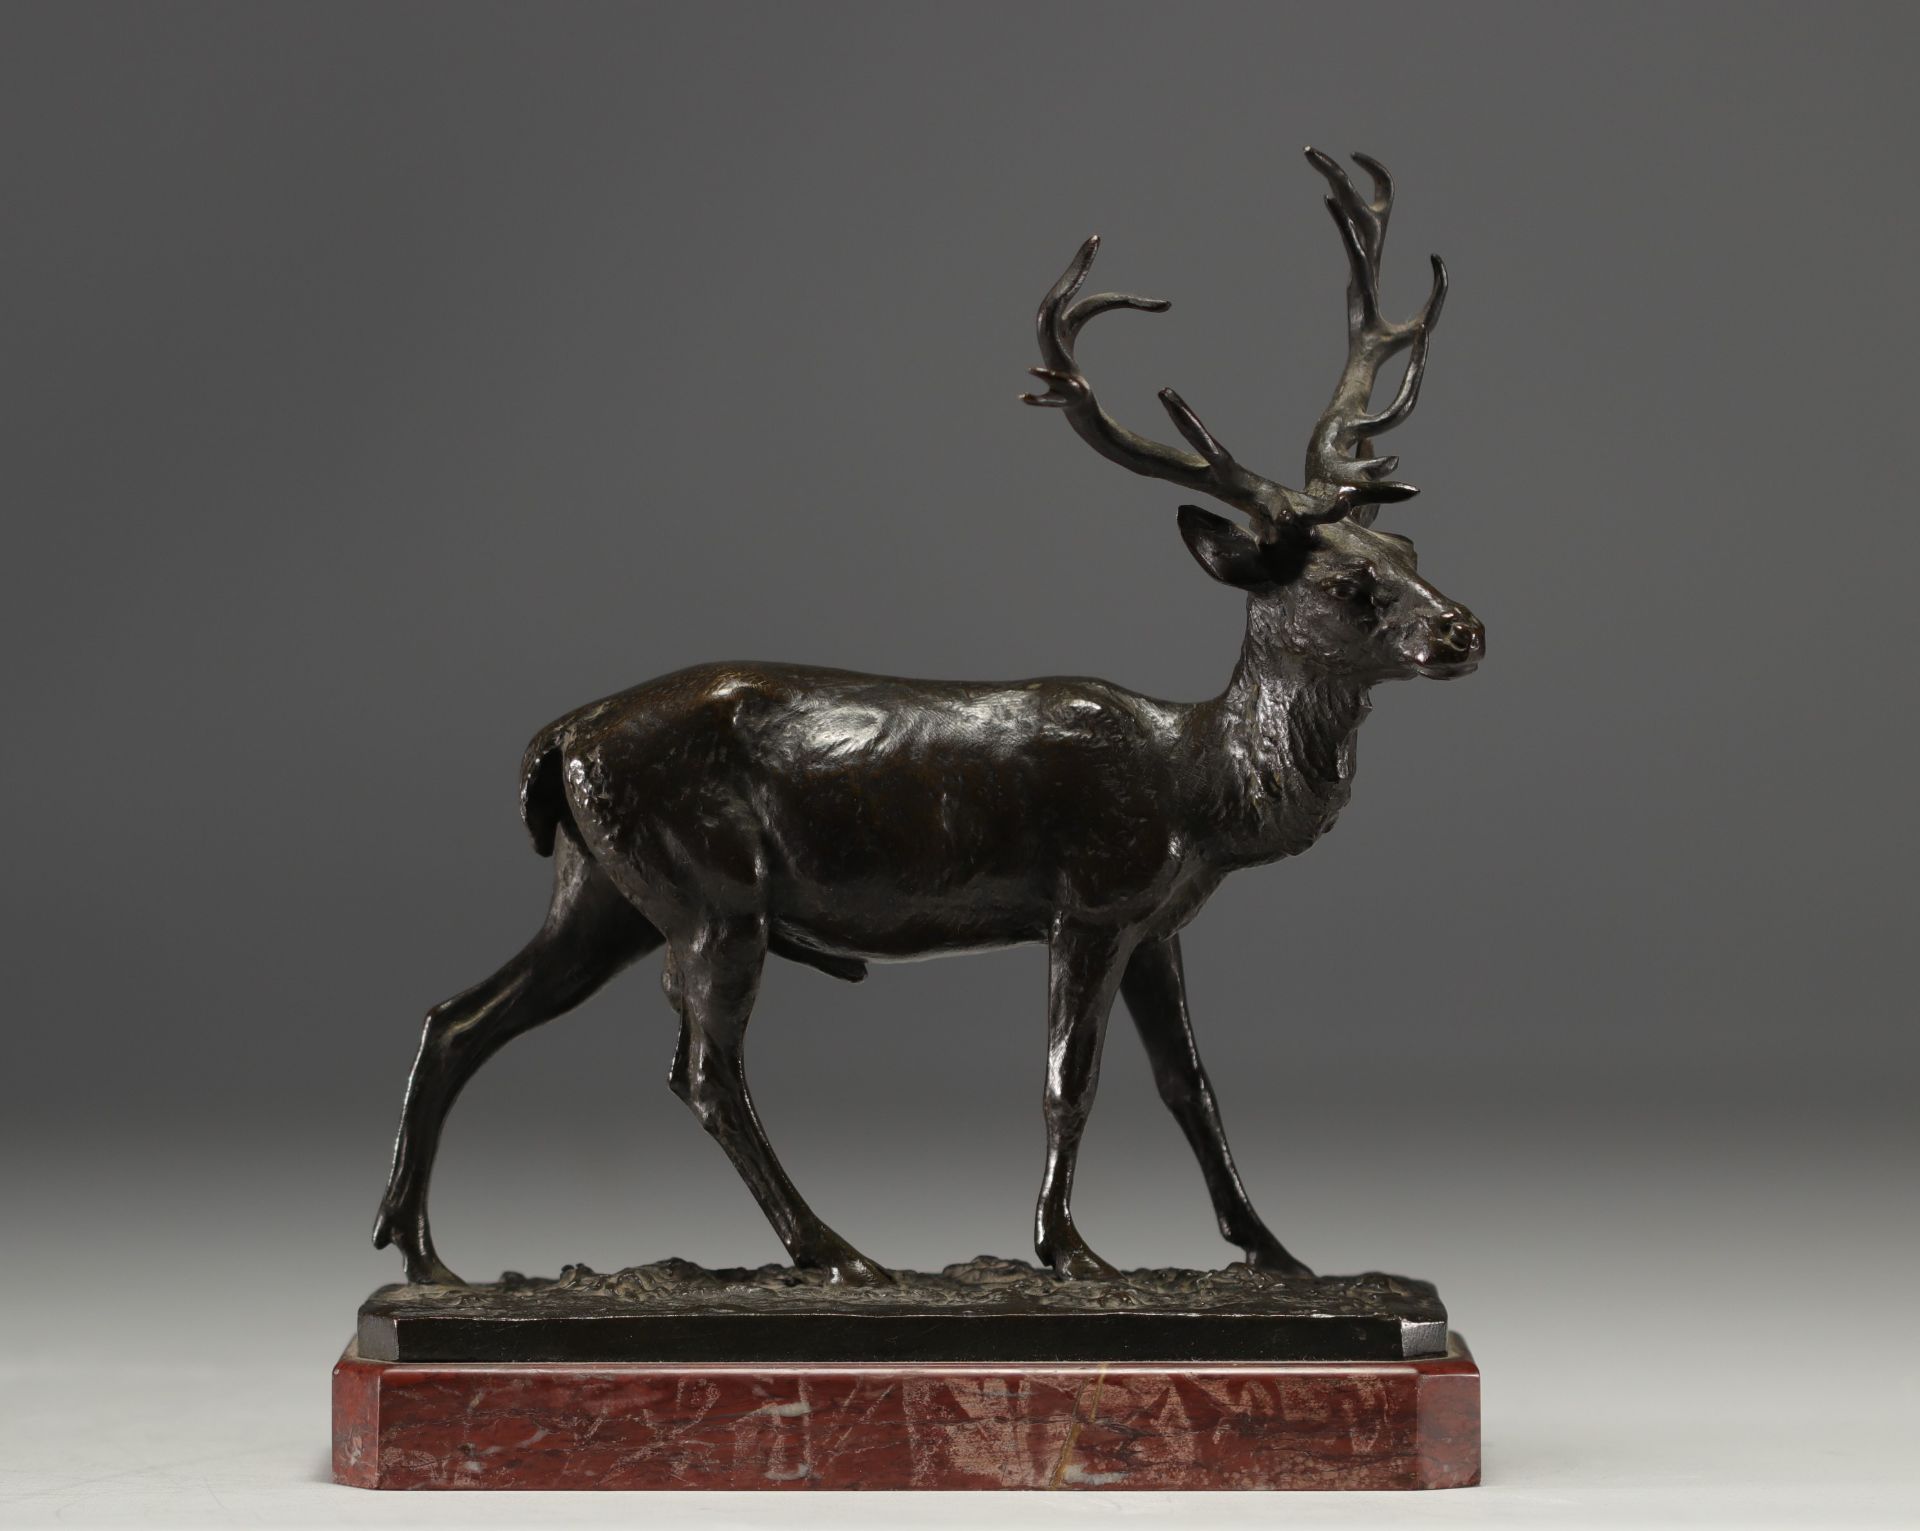 Christophe FRATIN (1801-1864) "Stag" Small bronze sculpture on a red marble base.